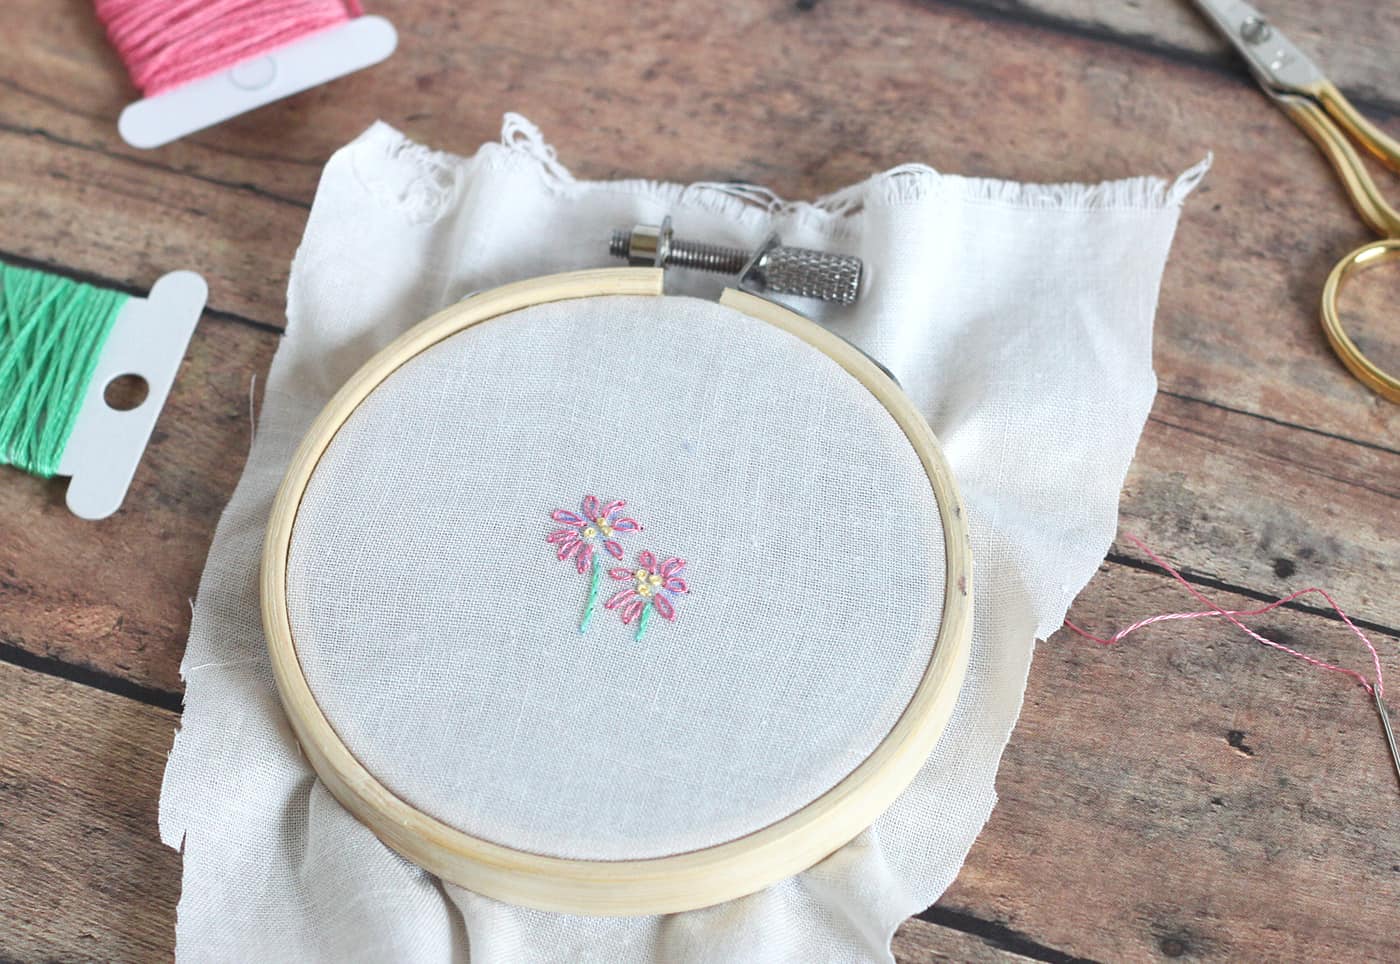 Pink flower with green stem stitched onto canvas in an embroidery hoop